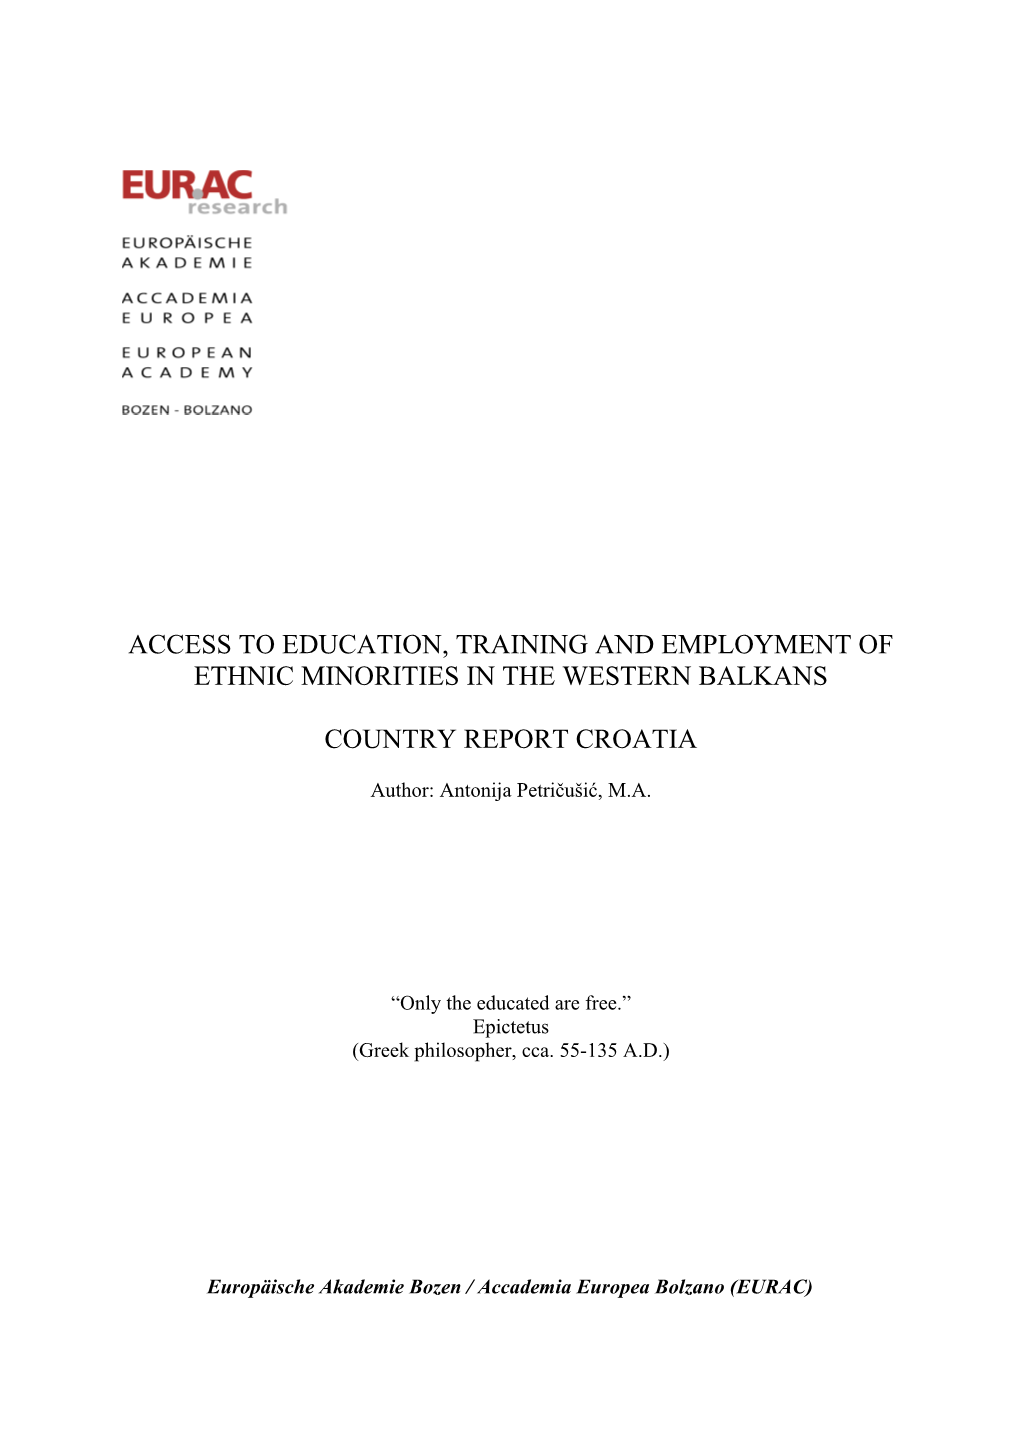 Access to Education, Training and Employment of Ethnic Minorities in the Western Balkans